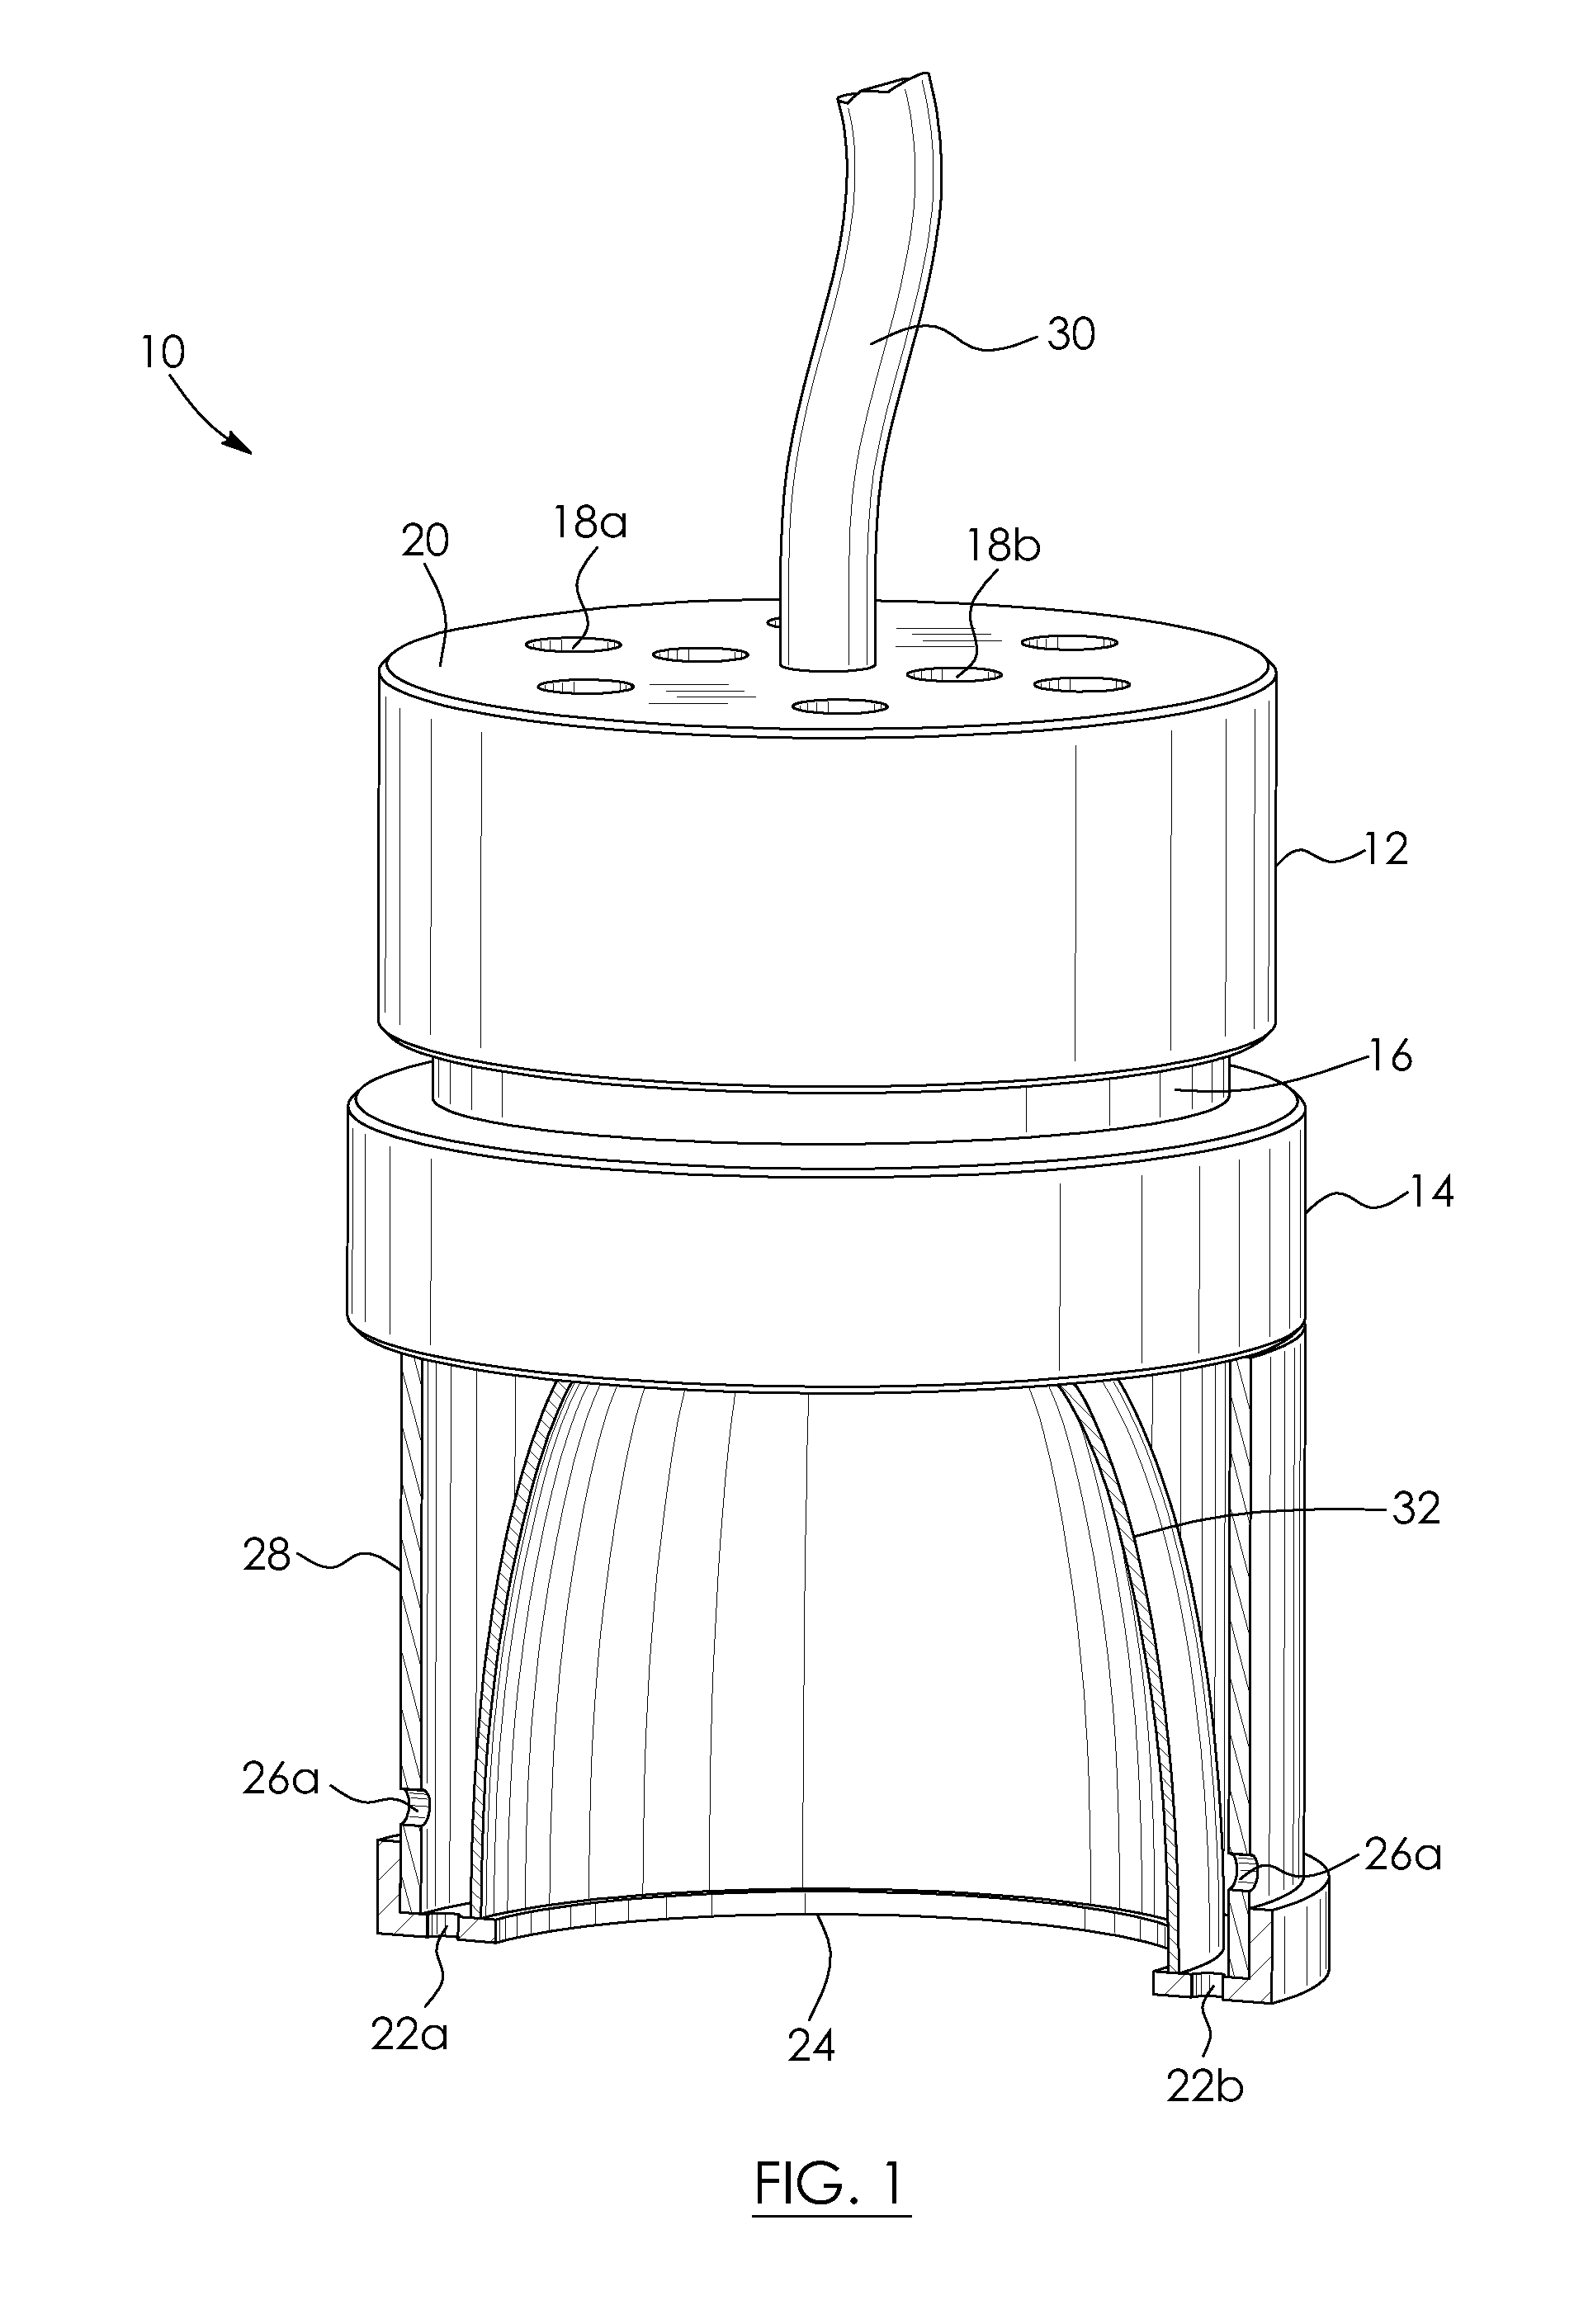 Light-emitting diode fixture with an improved thermal control system